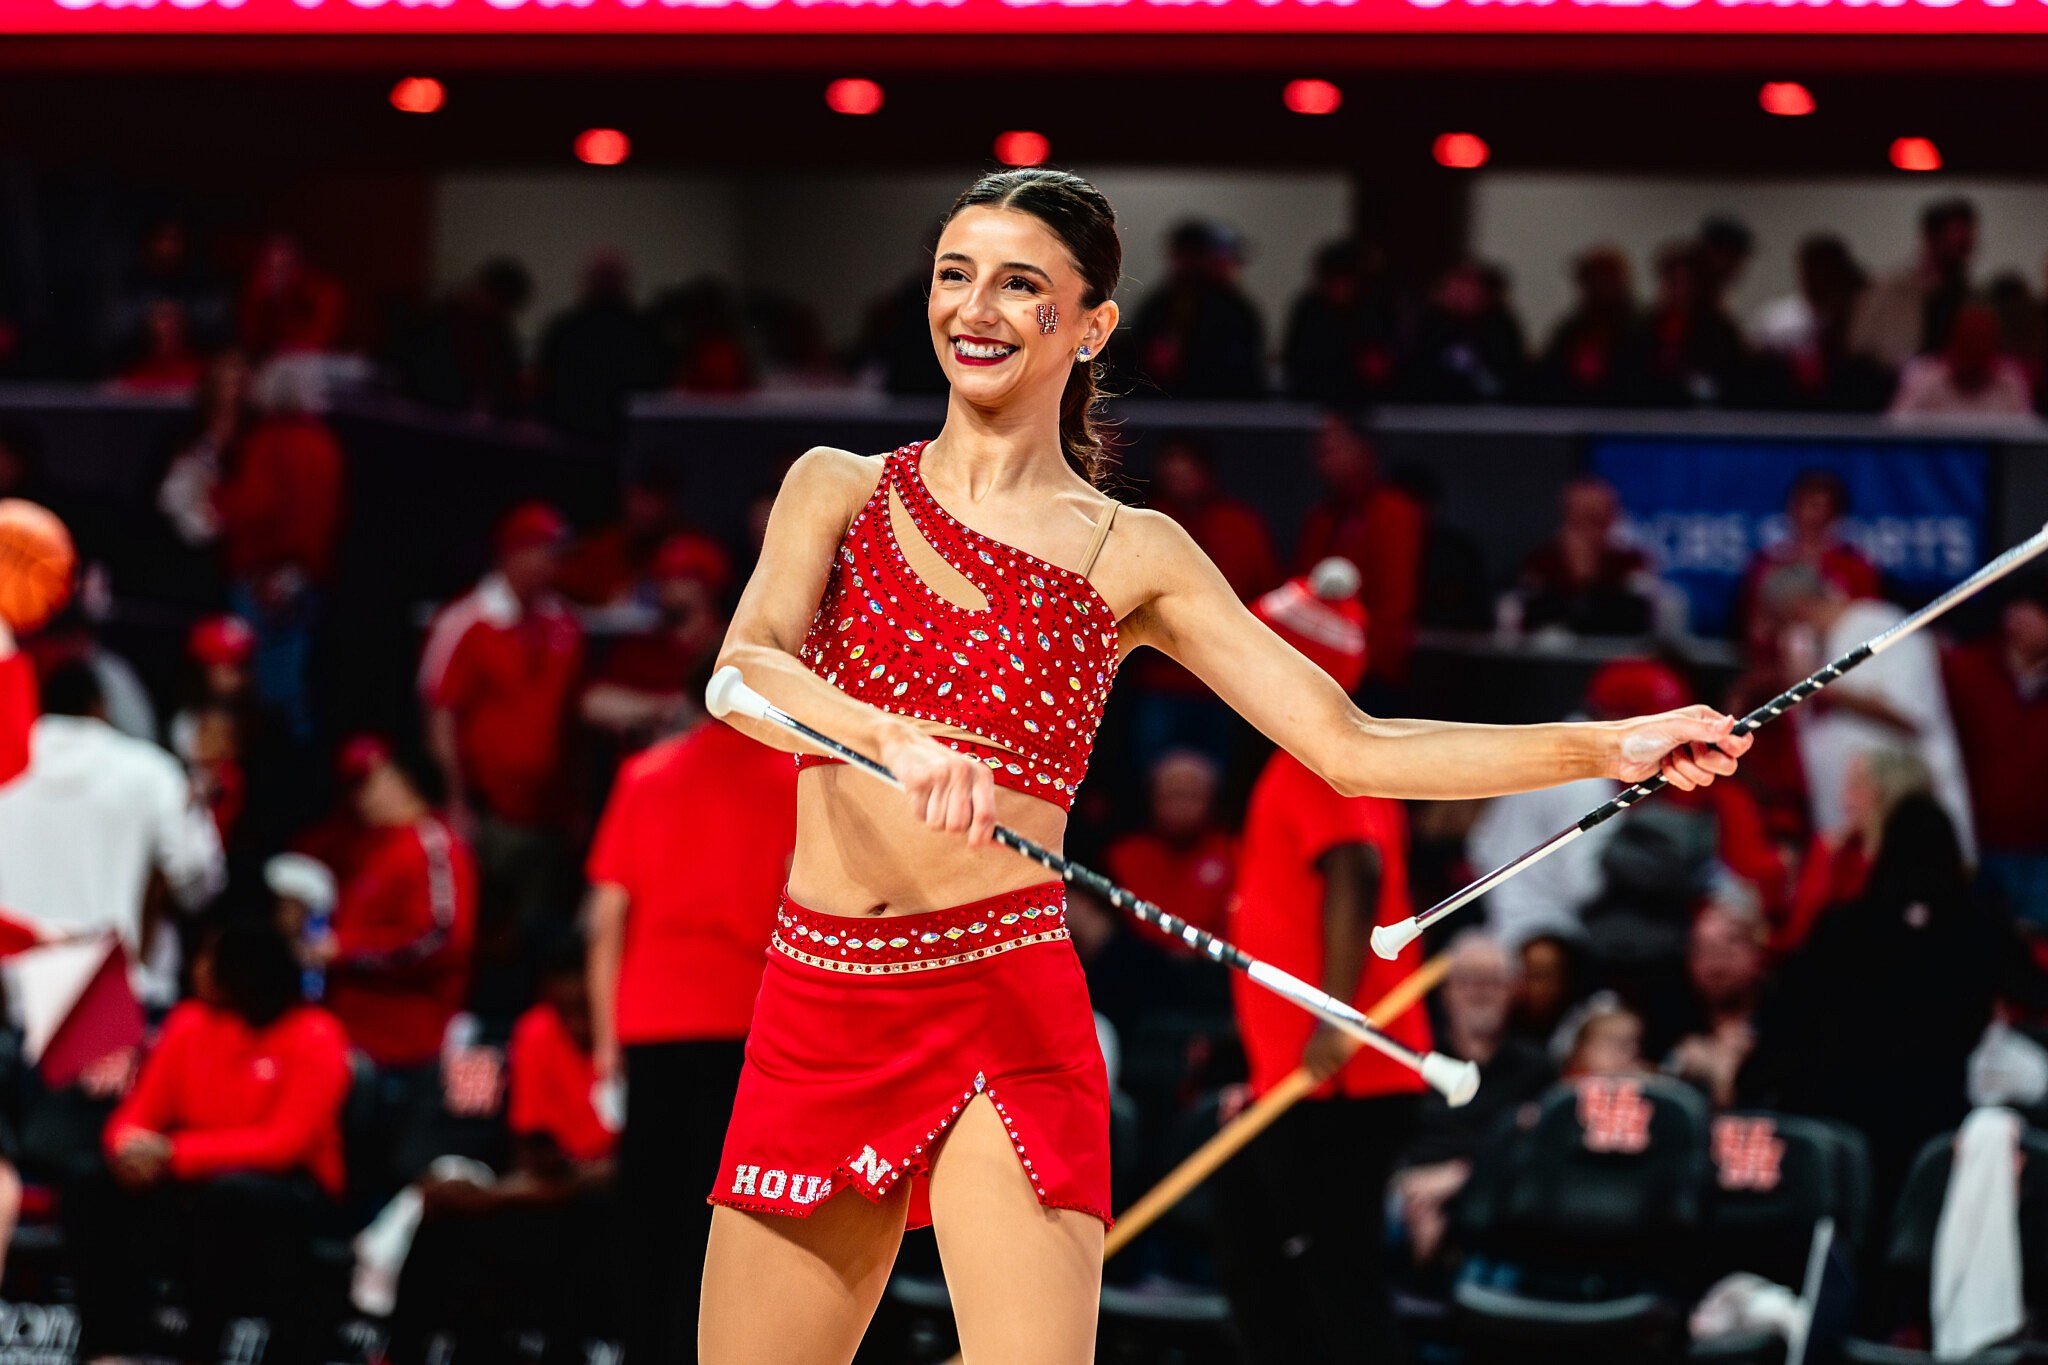 Cougars Get Spun Up With Feature Twirler